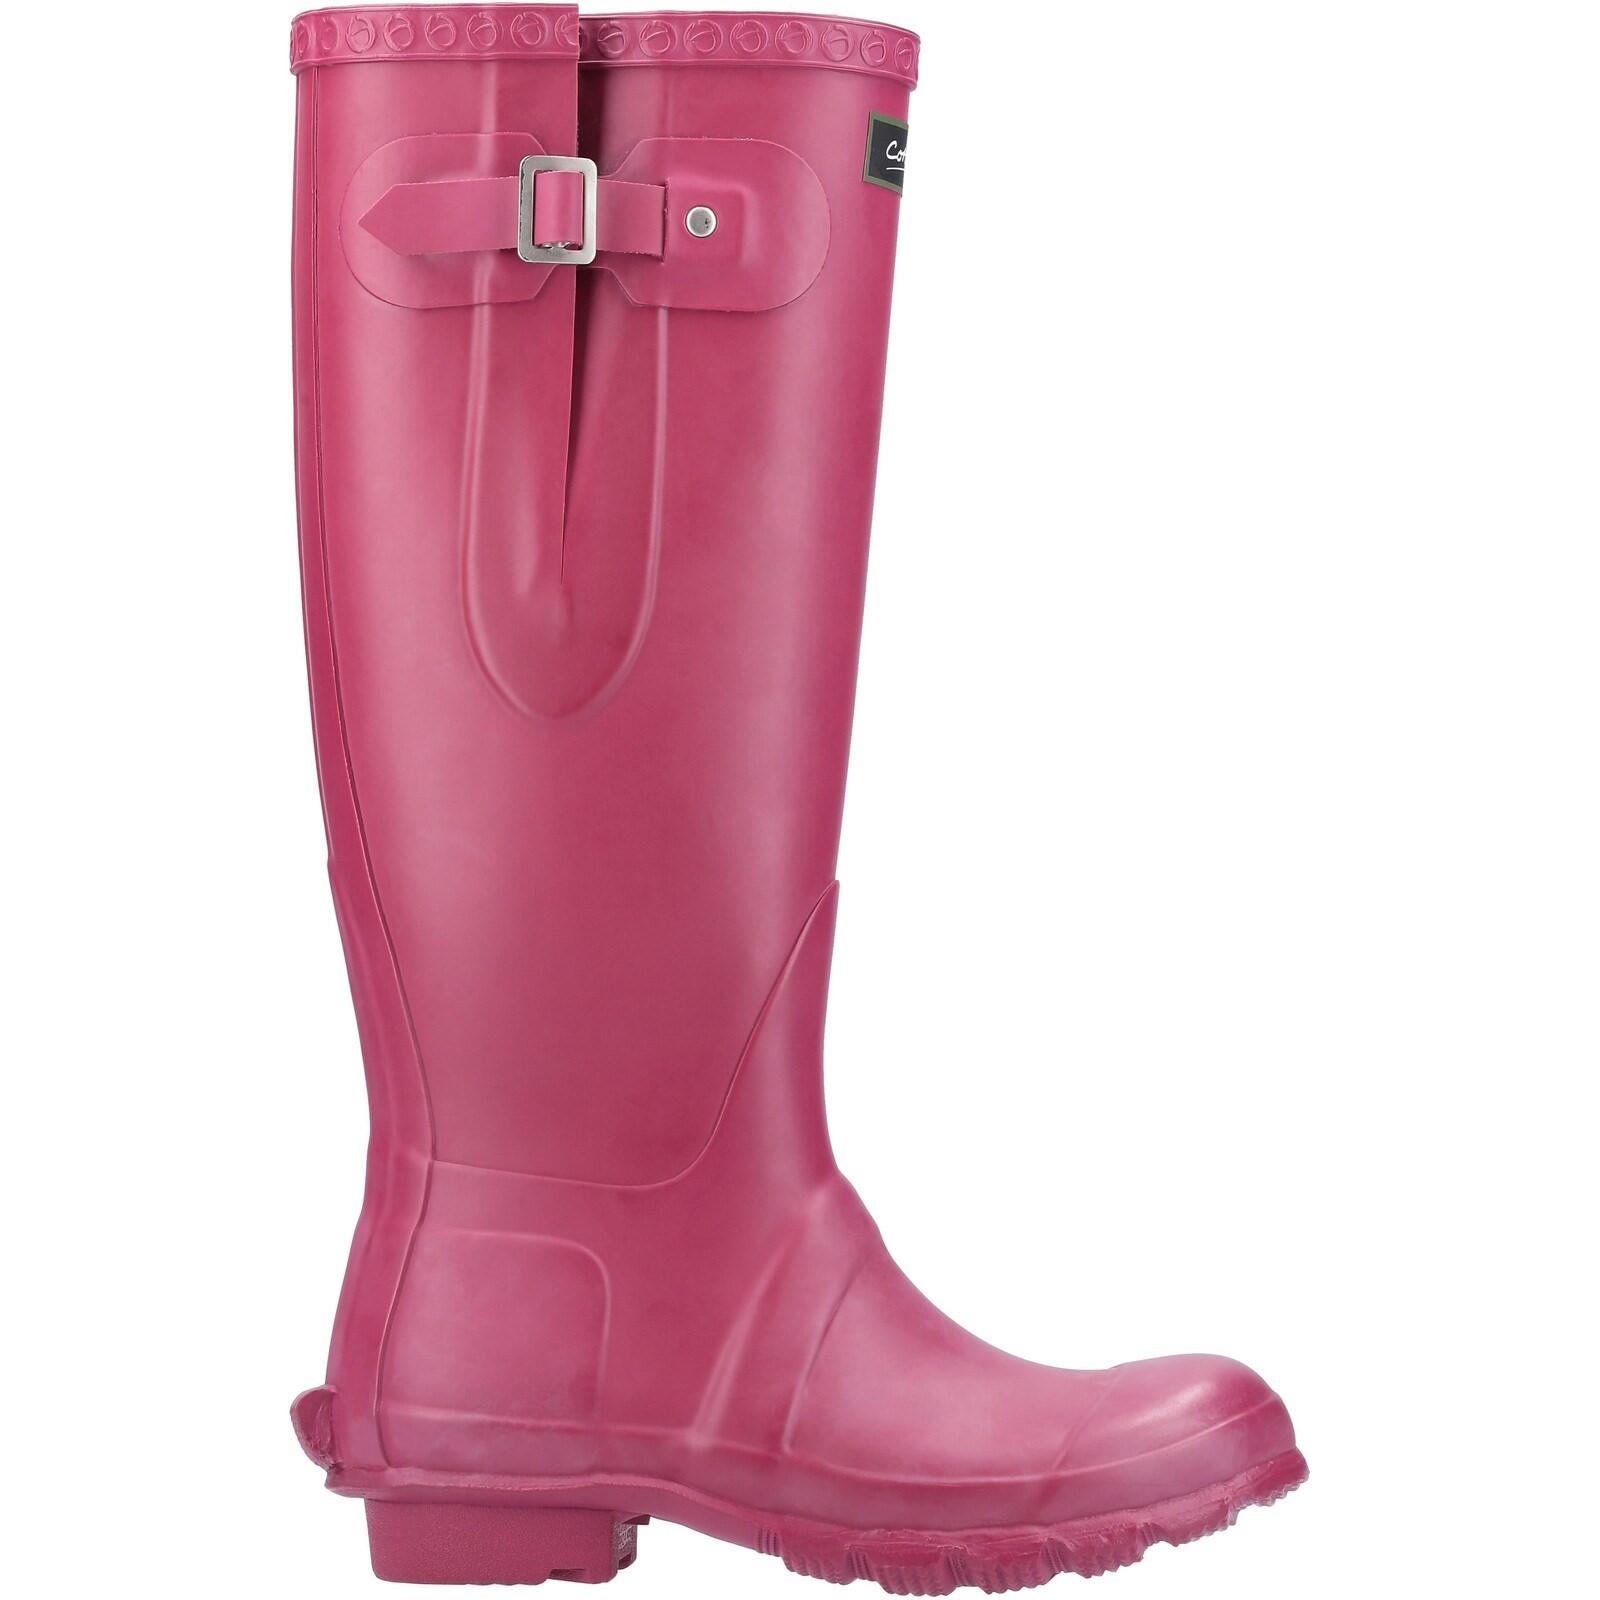 COTSWOLD Windsor Welly Plain Rubber Wellingtons PINK